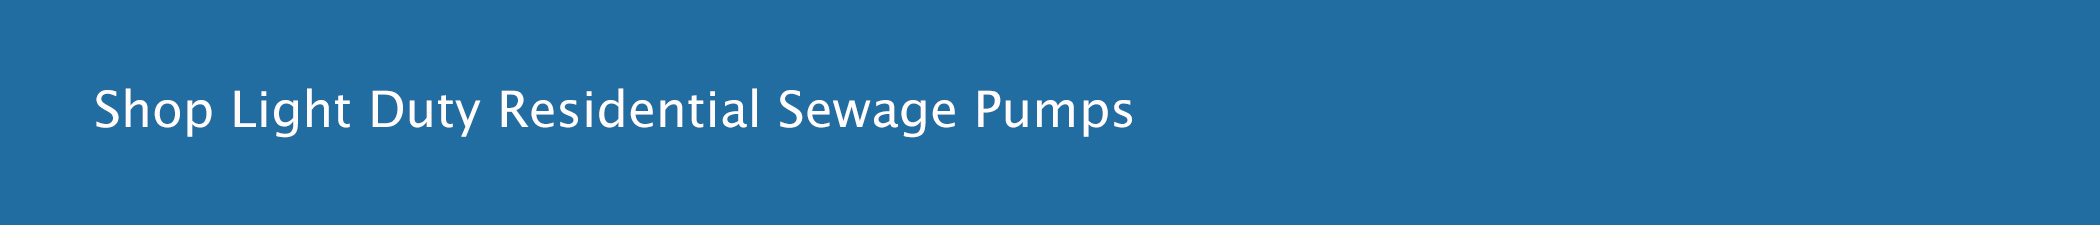 Shop by Light Duty Residential Sewage Pumps